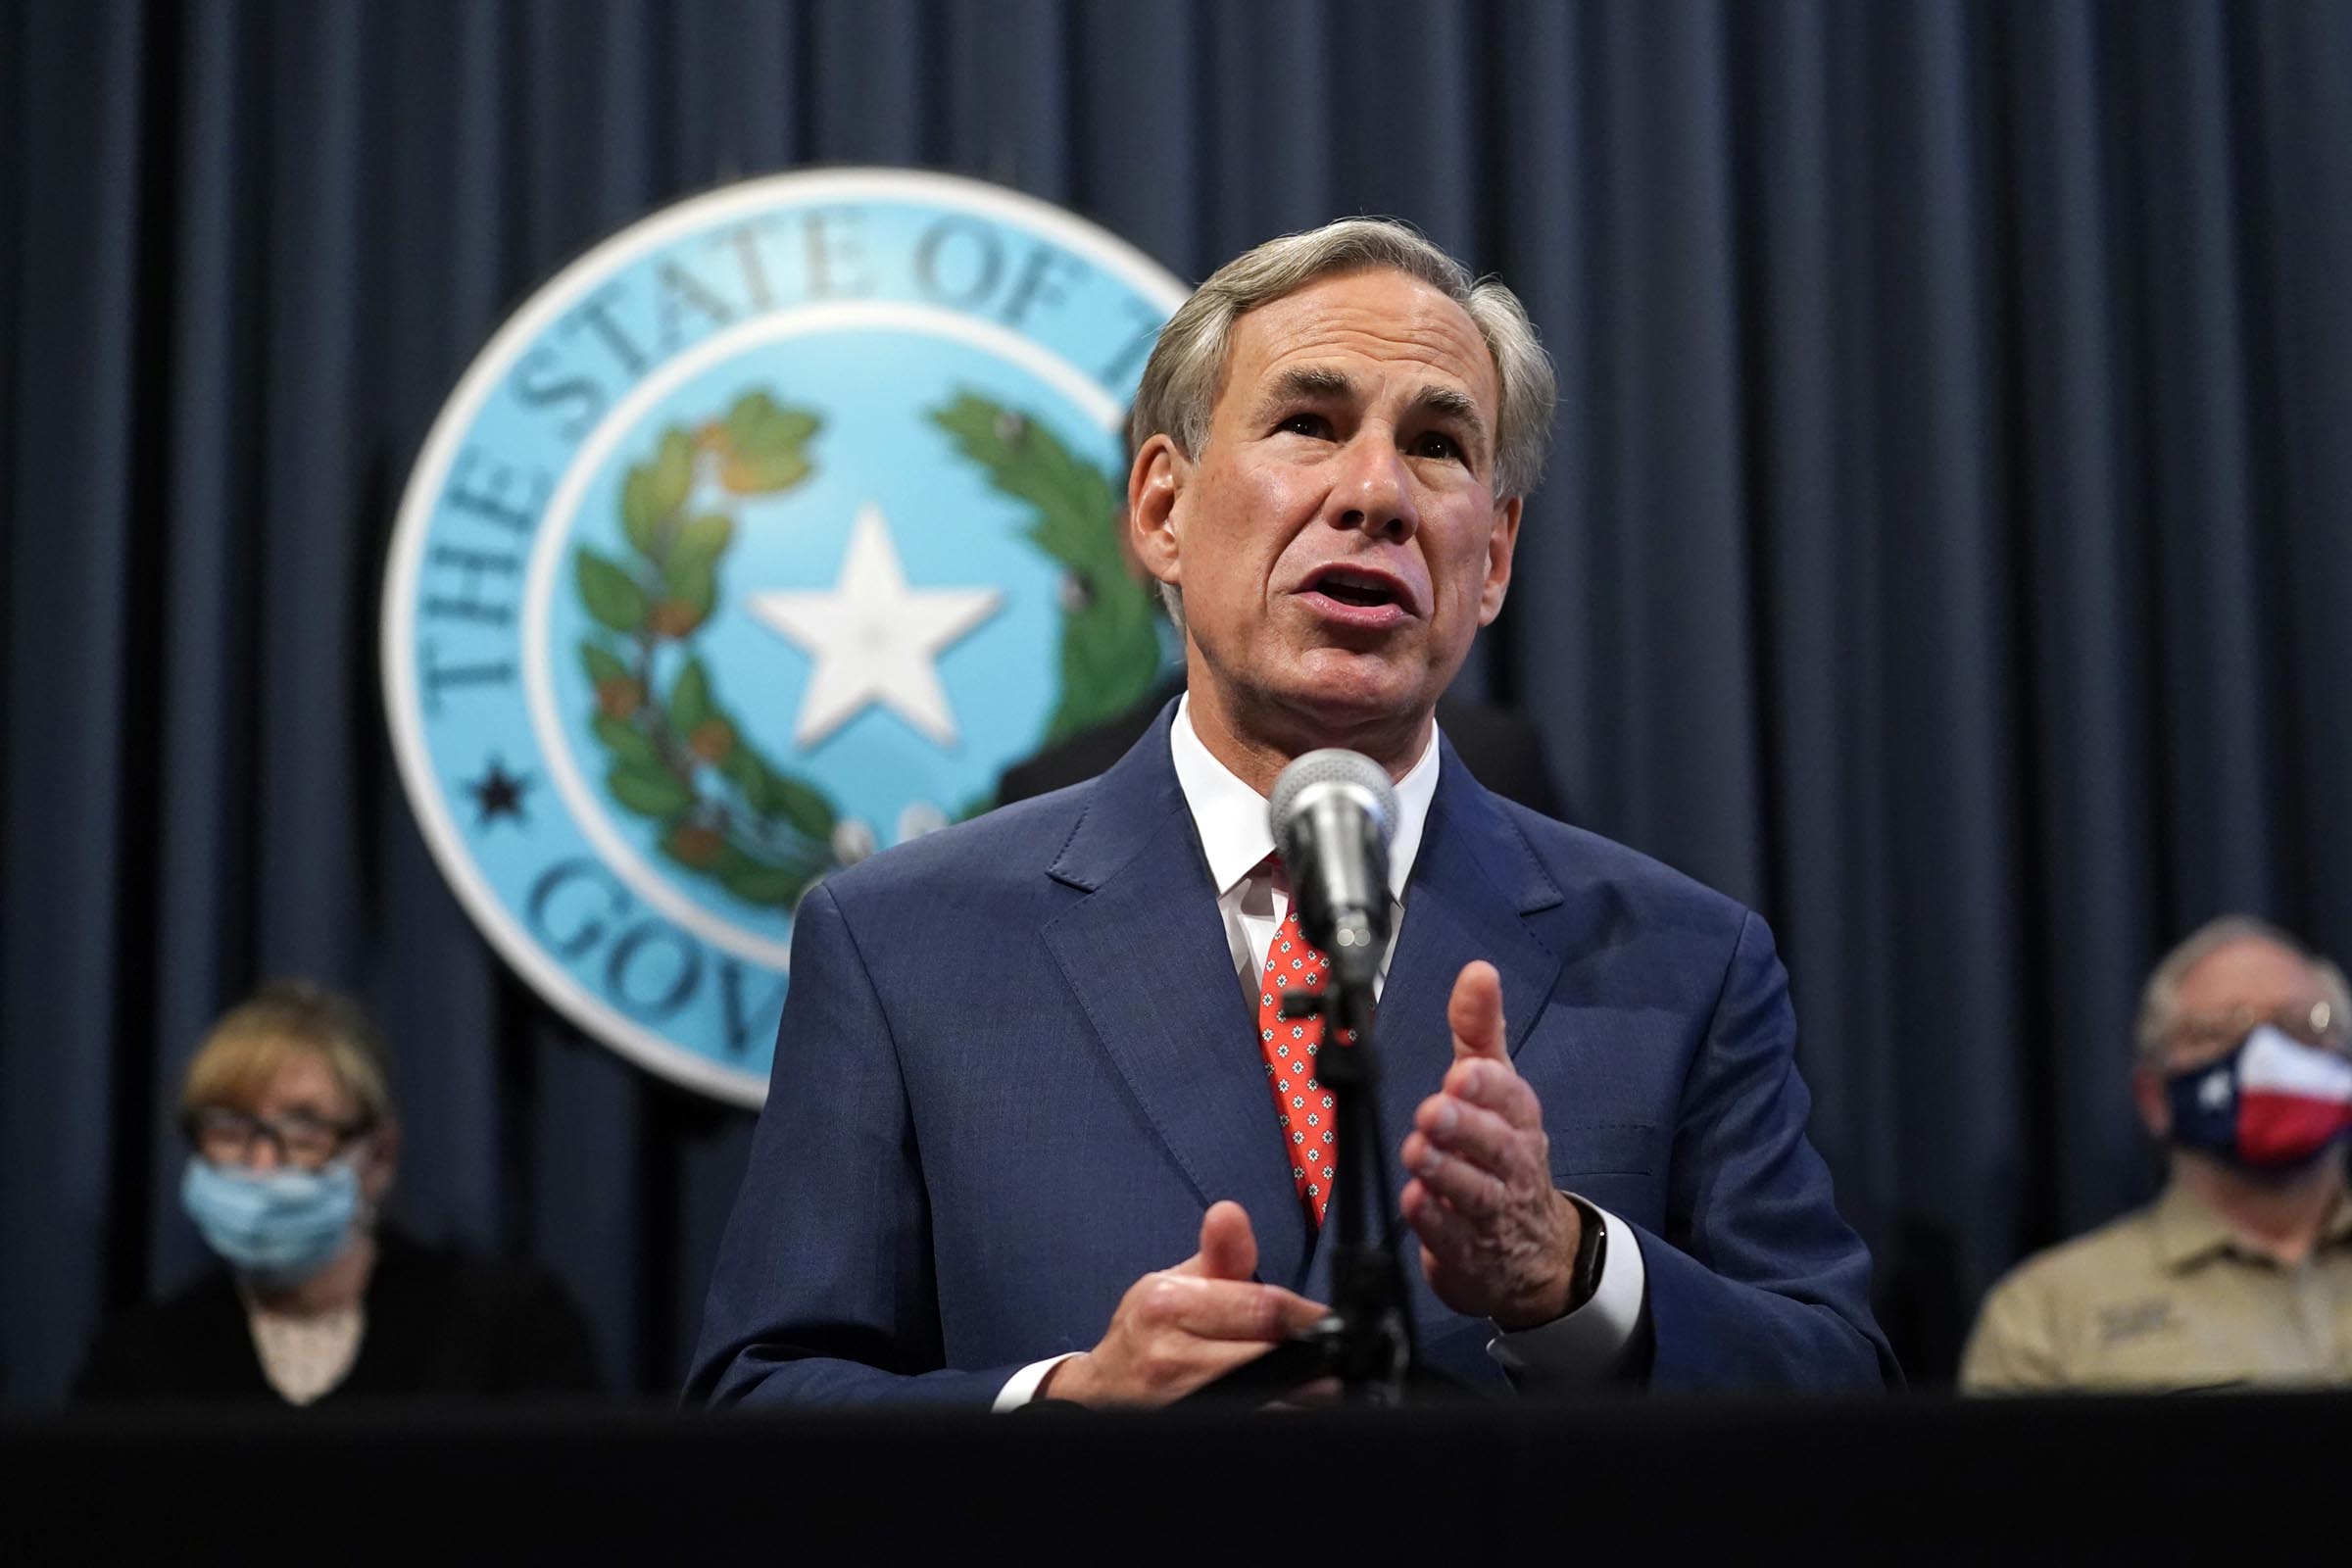 Texas Gov. Greg Abbott speaks during a news conference where he provided an update to Texas' response to COVID-19 in Austin, Texas on Sept. 17, 2020. (Eric Gay—AP)